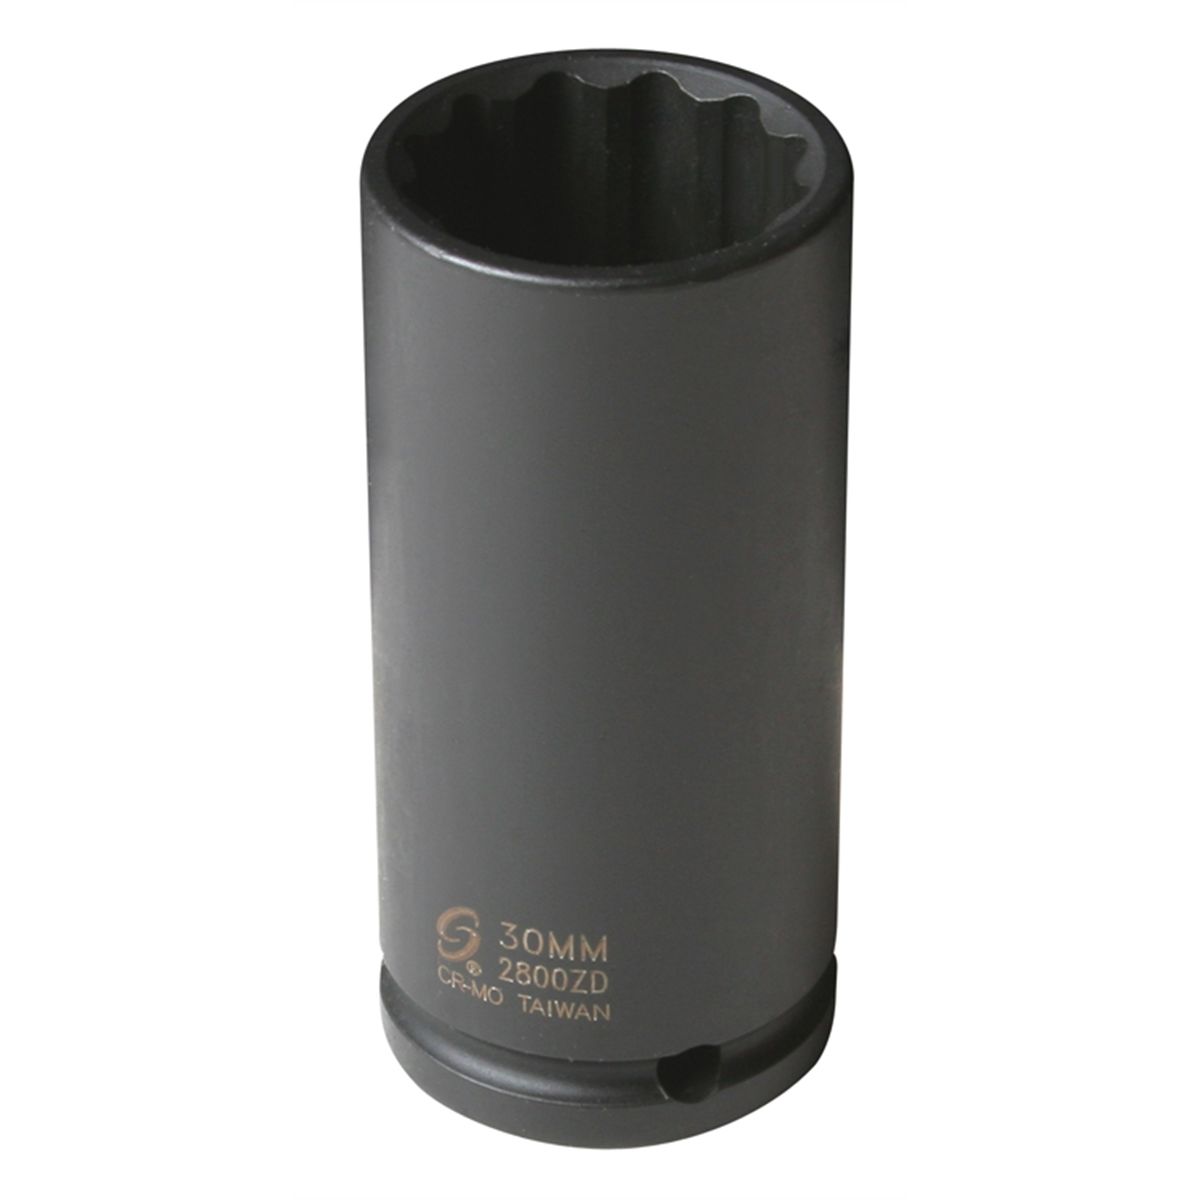 1/2" Drive x 30mm, Deep Spindle Nut, 12 Point Impact Socket